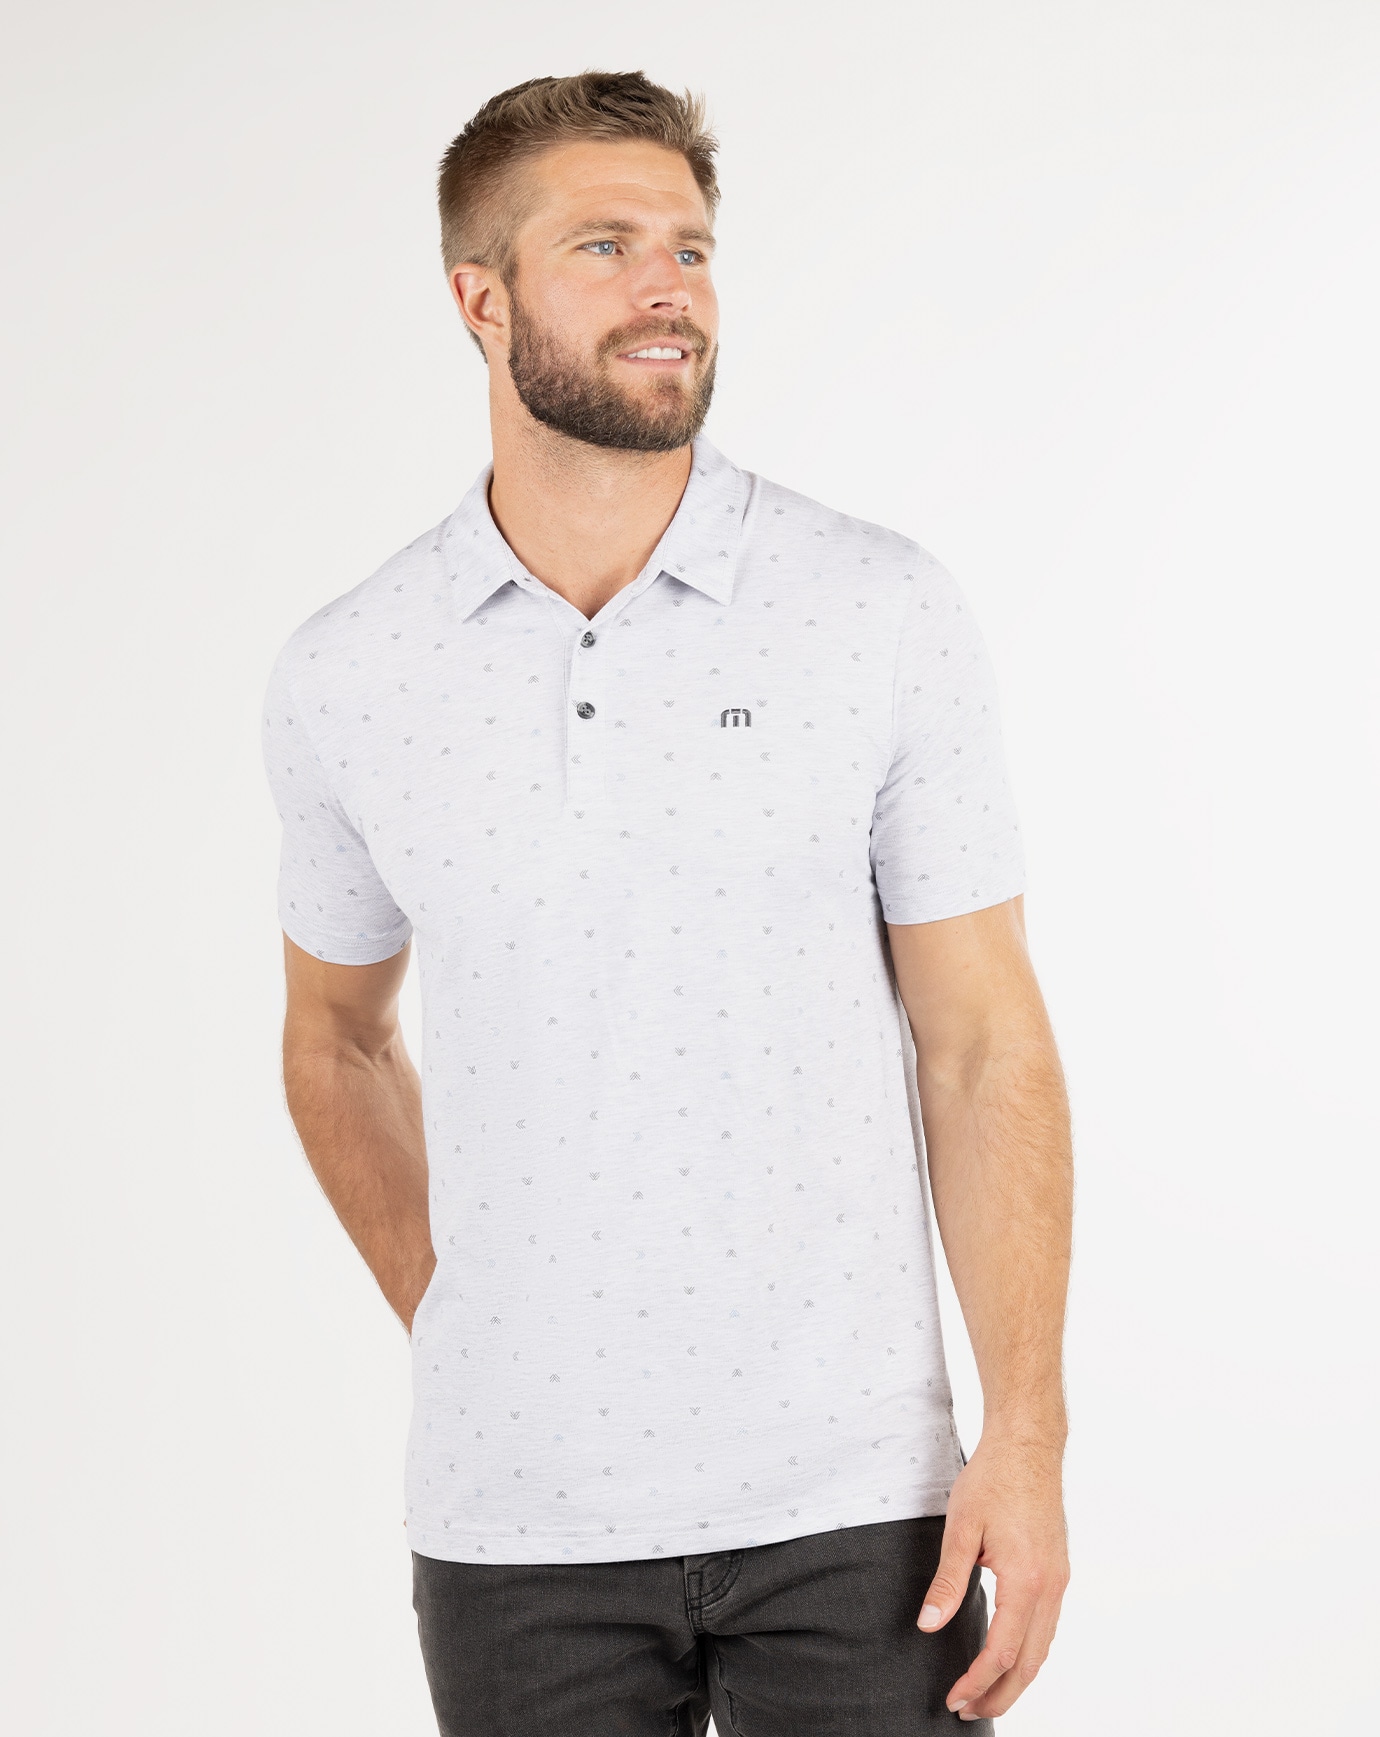 Related Product - HOT CHILI POLO